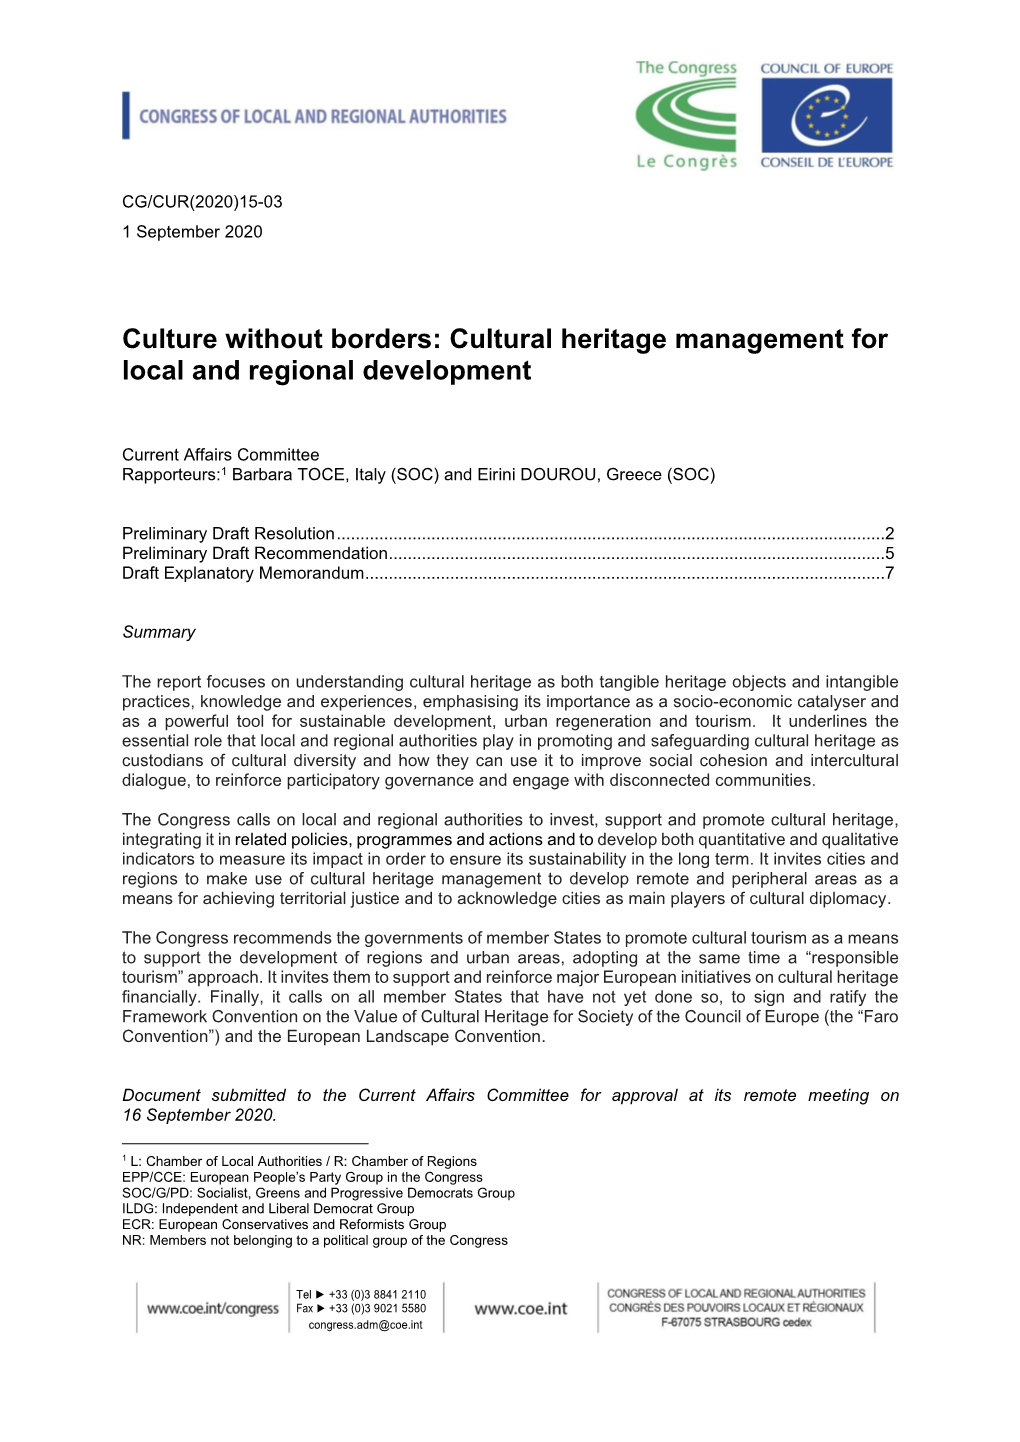 Culture Without Borders: Cultural Heritage Management for Local and Regional Development